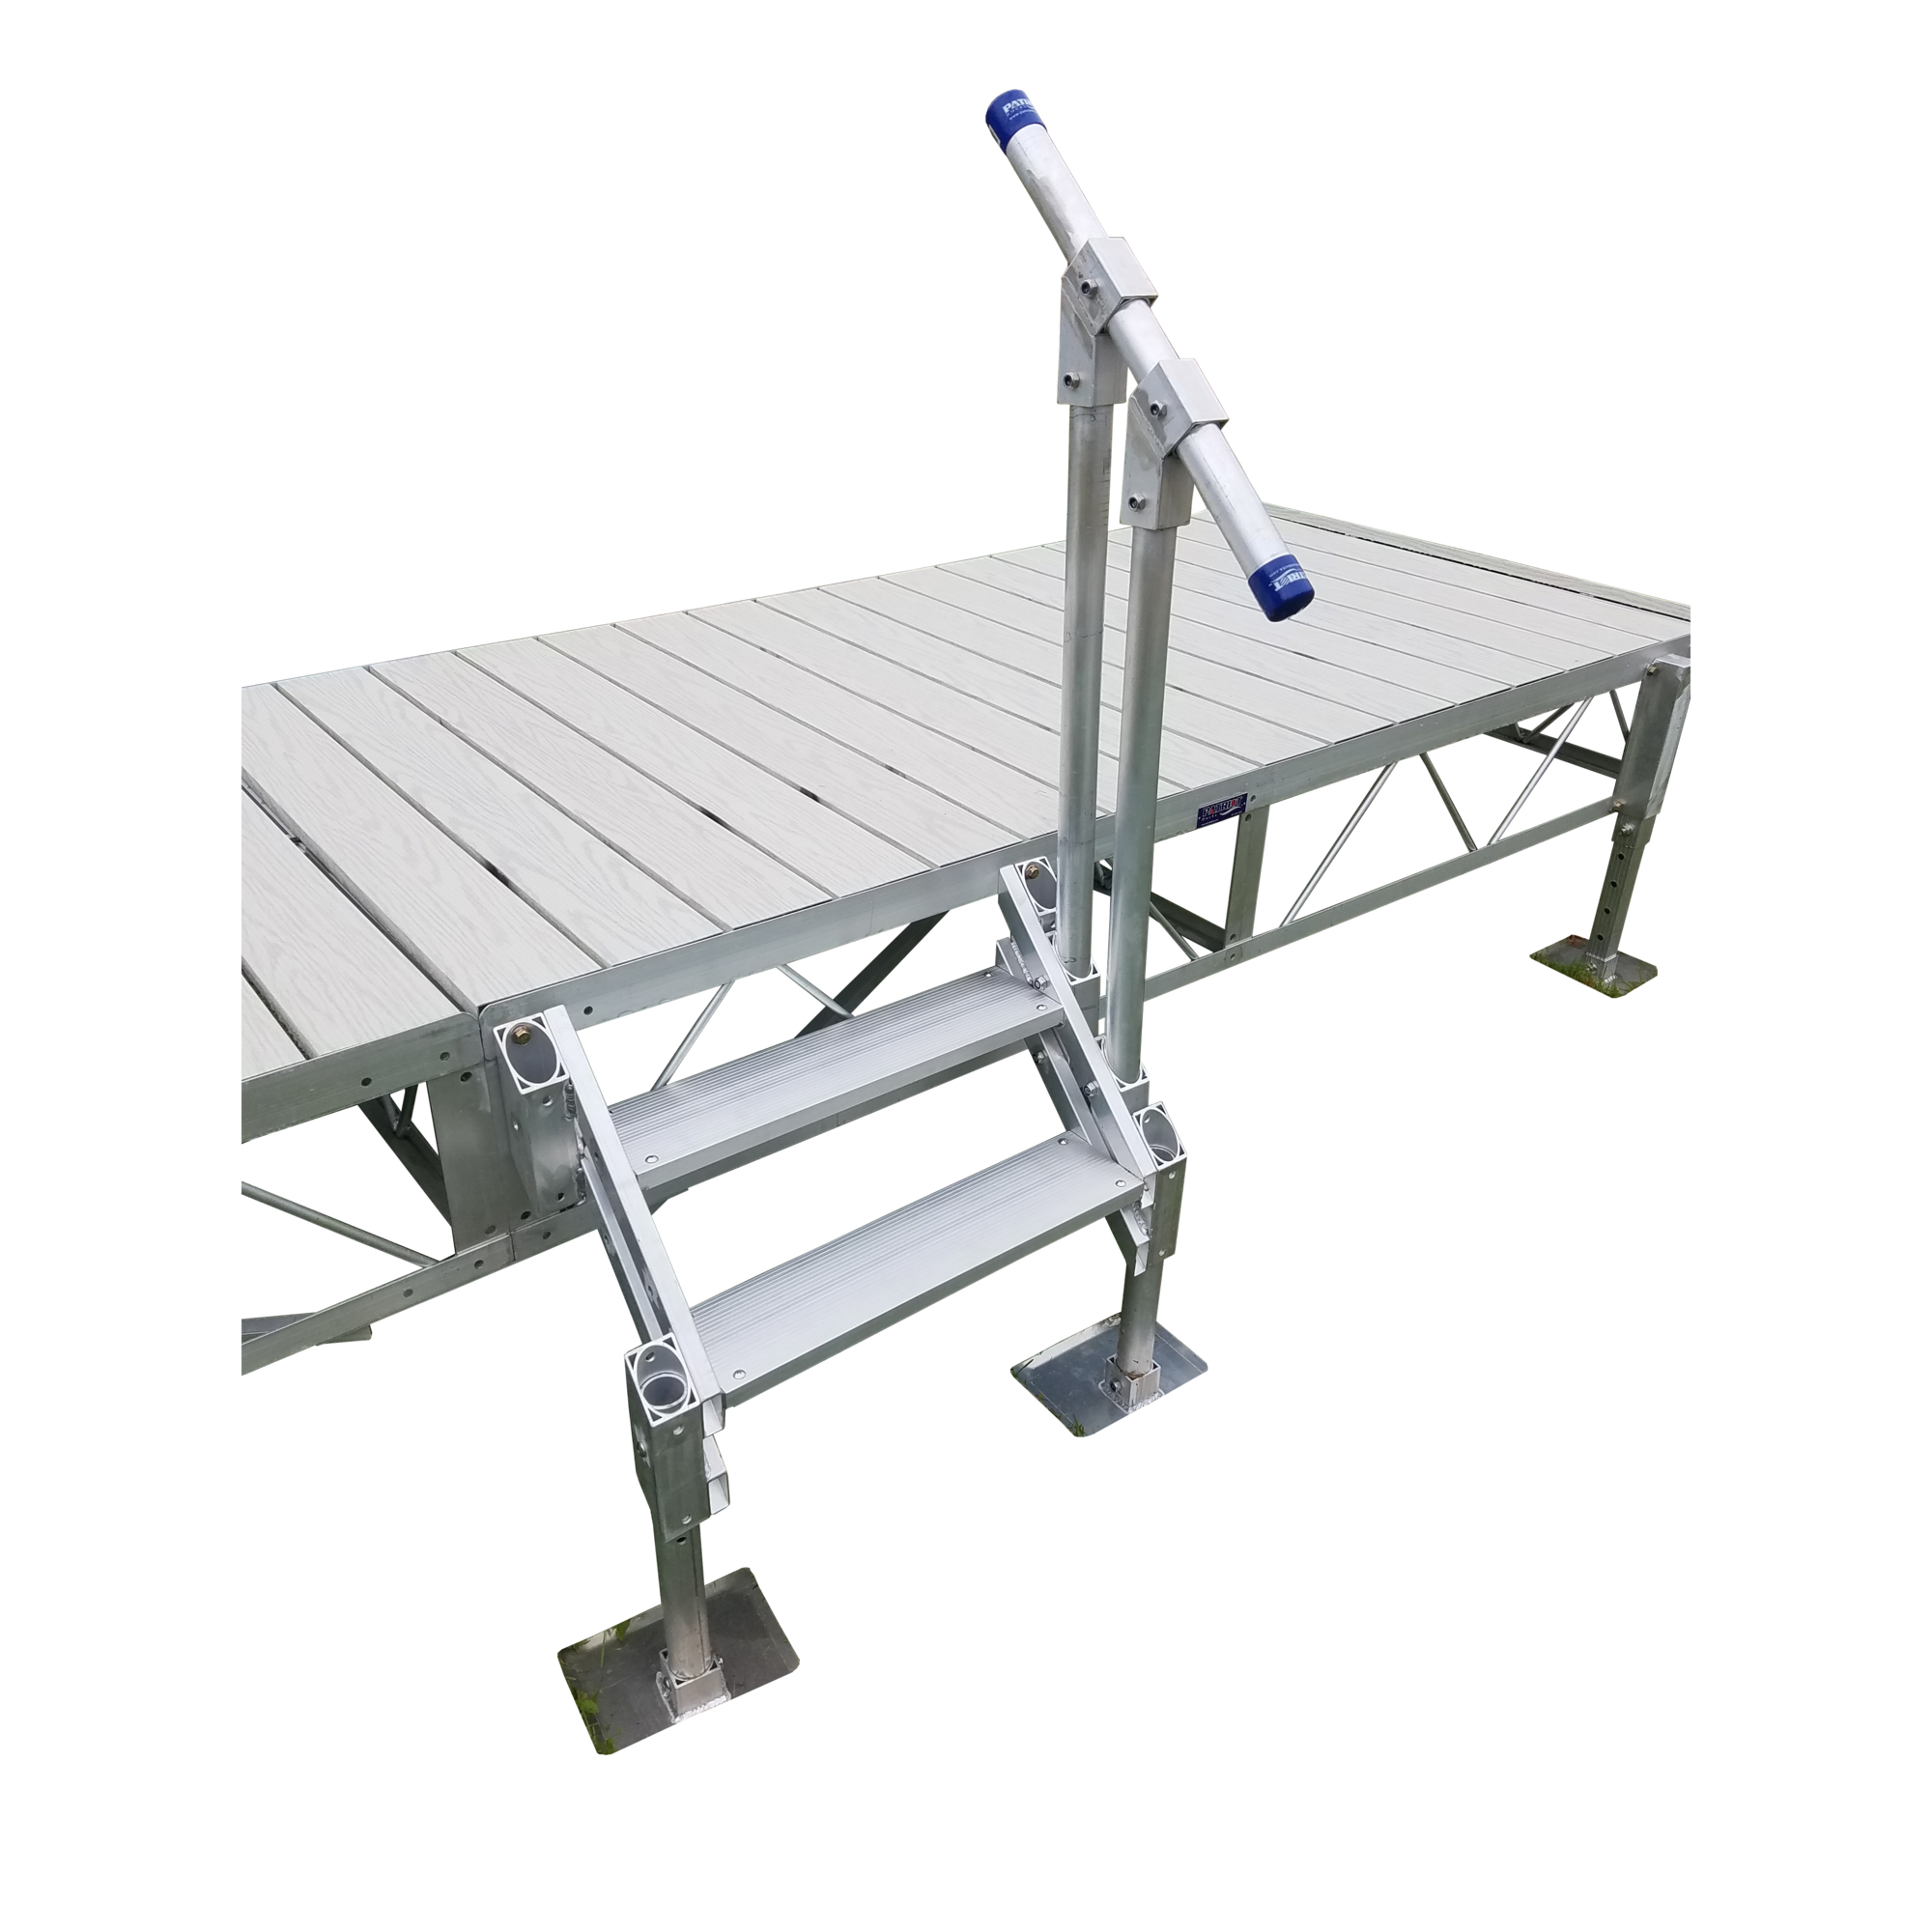 Patriot Docks, Marine Stairs, 2 Step, Product Type Ladder, Length 48 in, Width 24 in, Model 10922